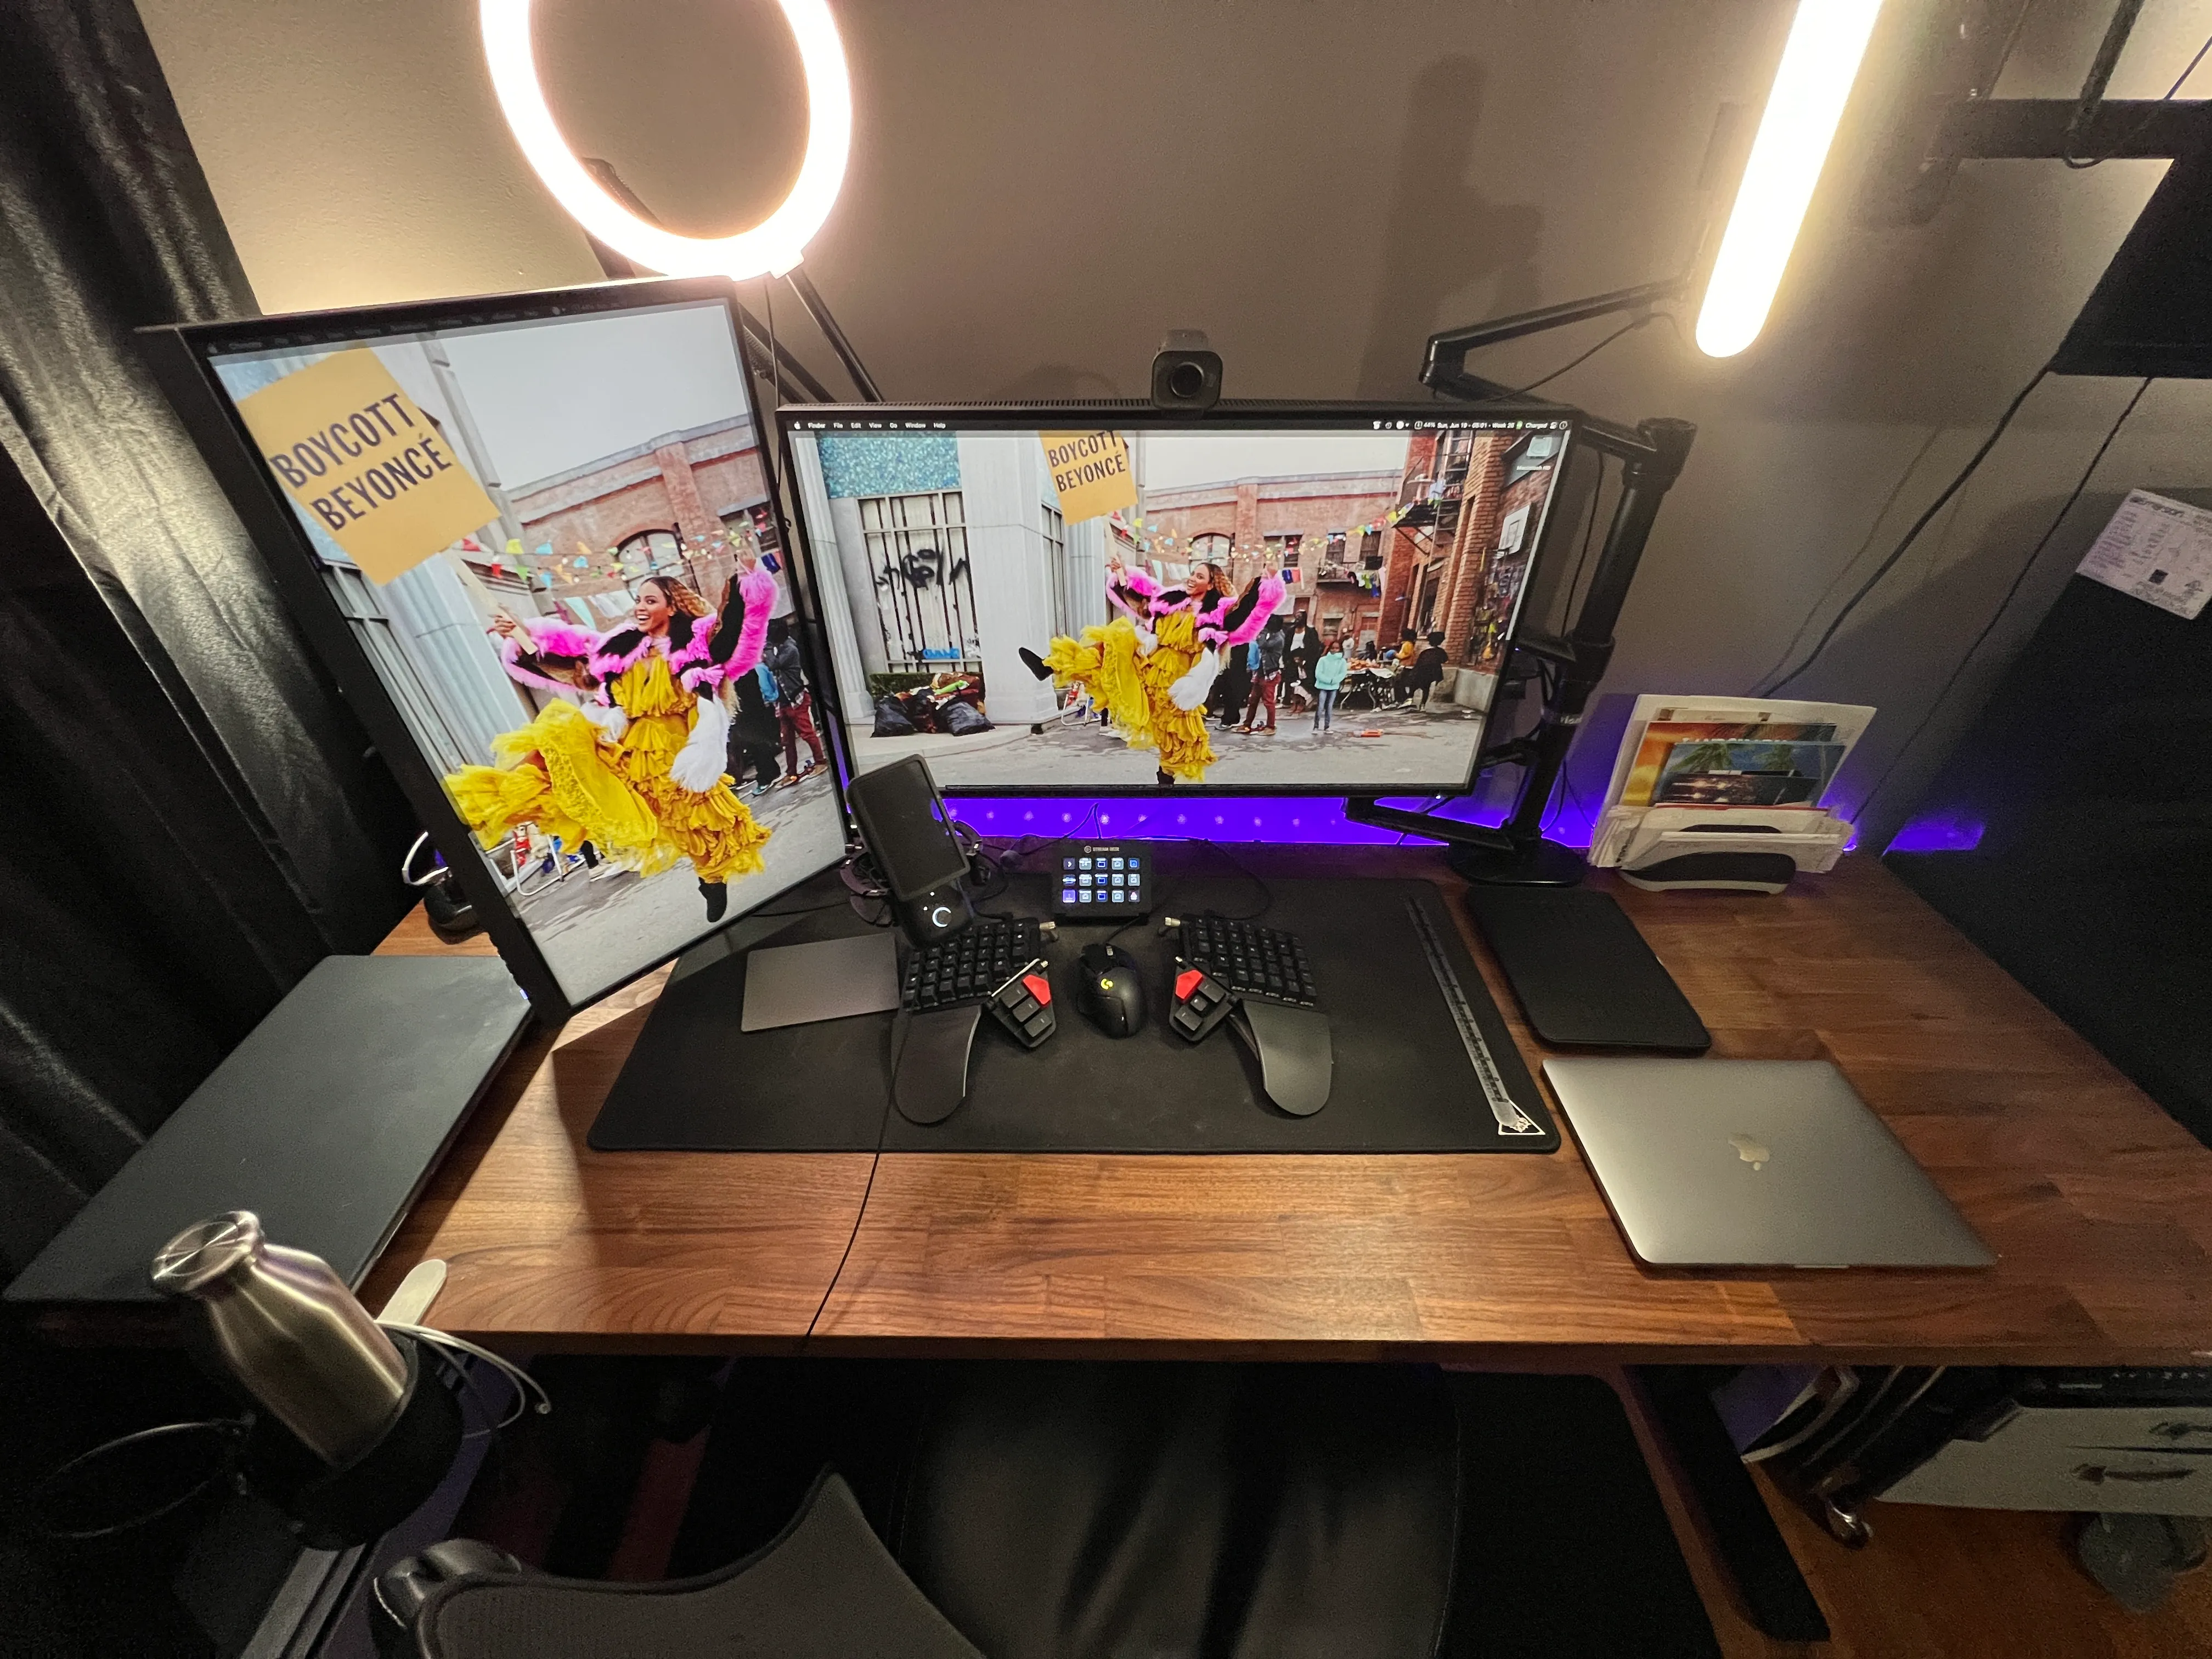 Manny's work from home setup and gear. Featuring dual monitor displays: vertical to the left, horizontal to the right. A split keyboard with mouse in the center and track pad to the left. A stream deck, webcam and 2 lights. A personal and work laptop on opposite ends.